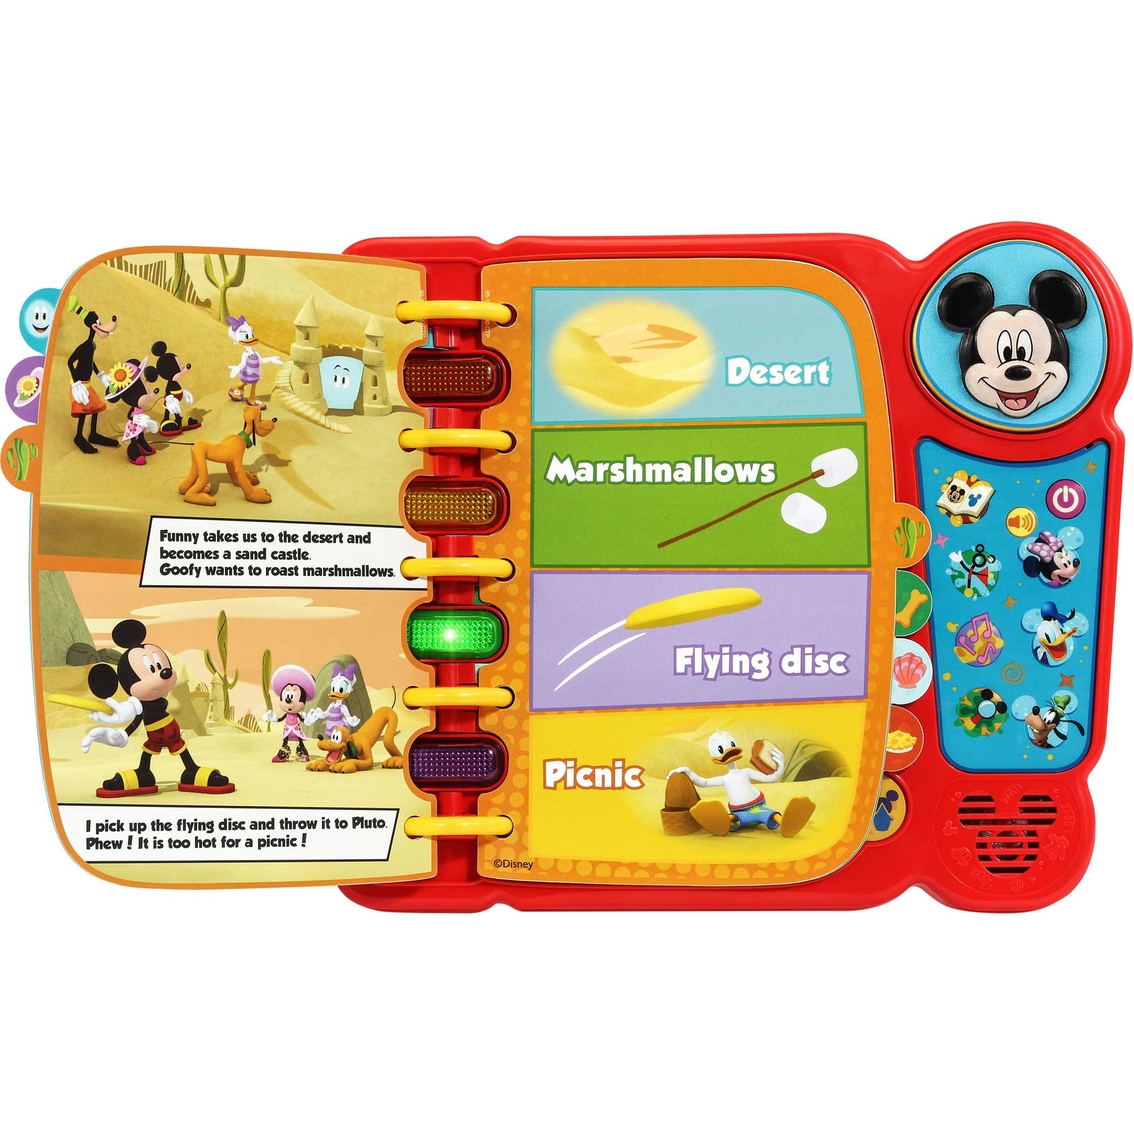 Disney Mickey Mouse Clubhouse Memory Match Game, Red, Yellow